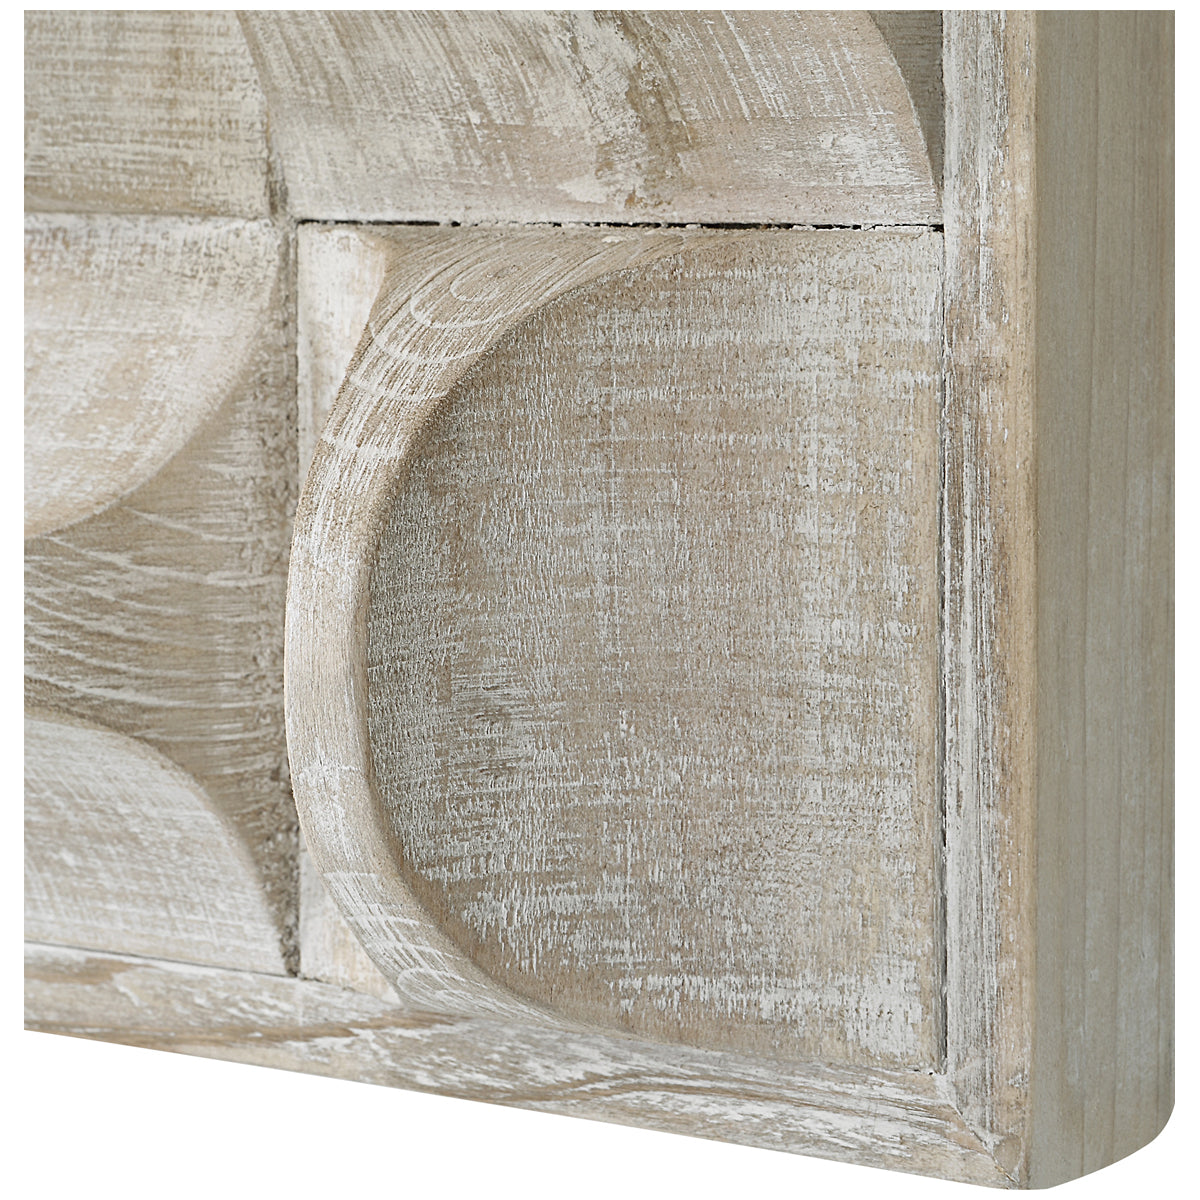 Uttermost Pickford Wood Wall Decor, Natural